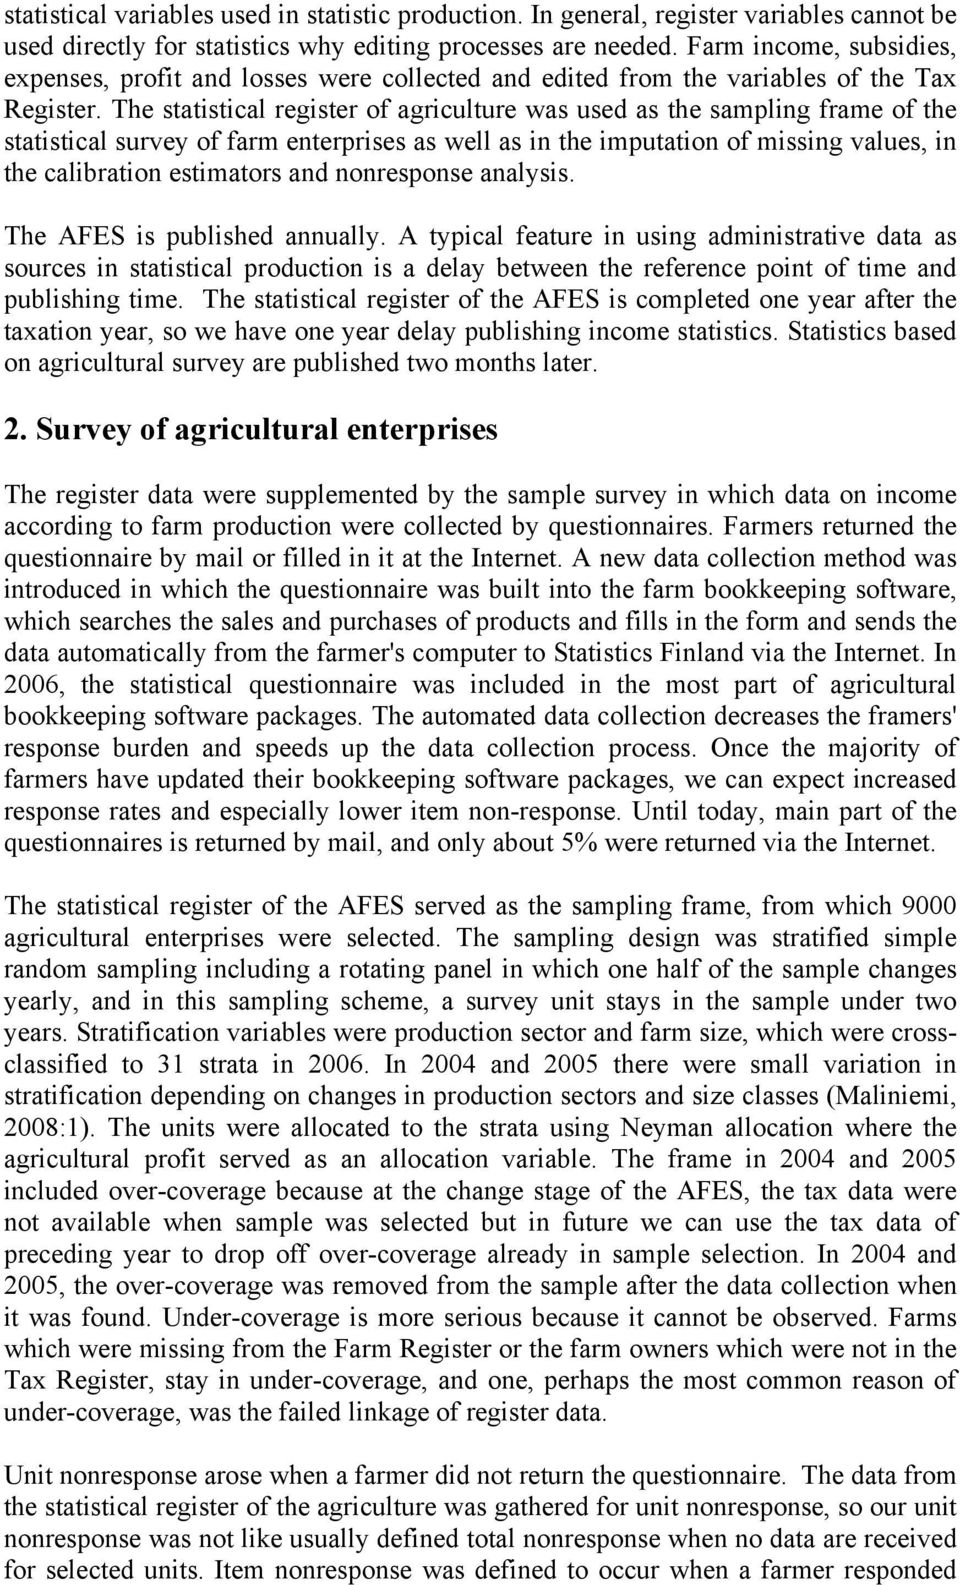 The statistical register of agriculture was used as the sampling frame of the statistical survey of farm enterprises as well as in the imputation of missing values, in the calibration estimators and